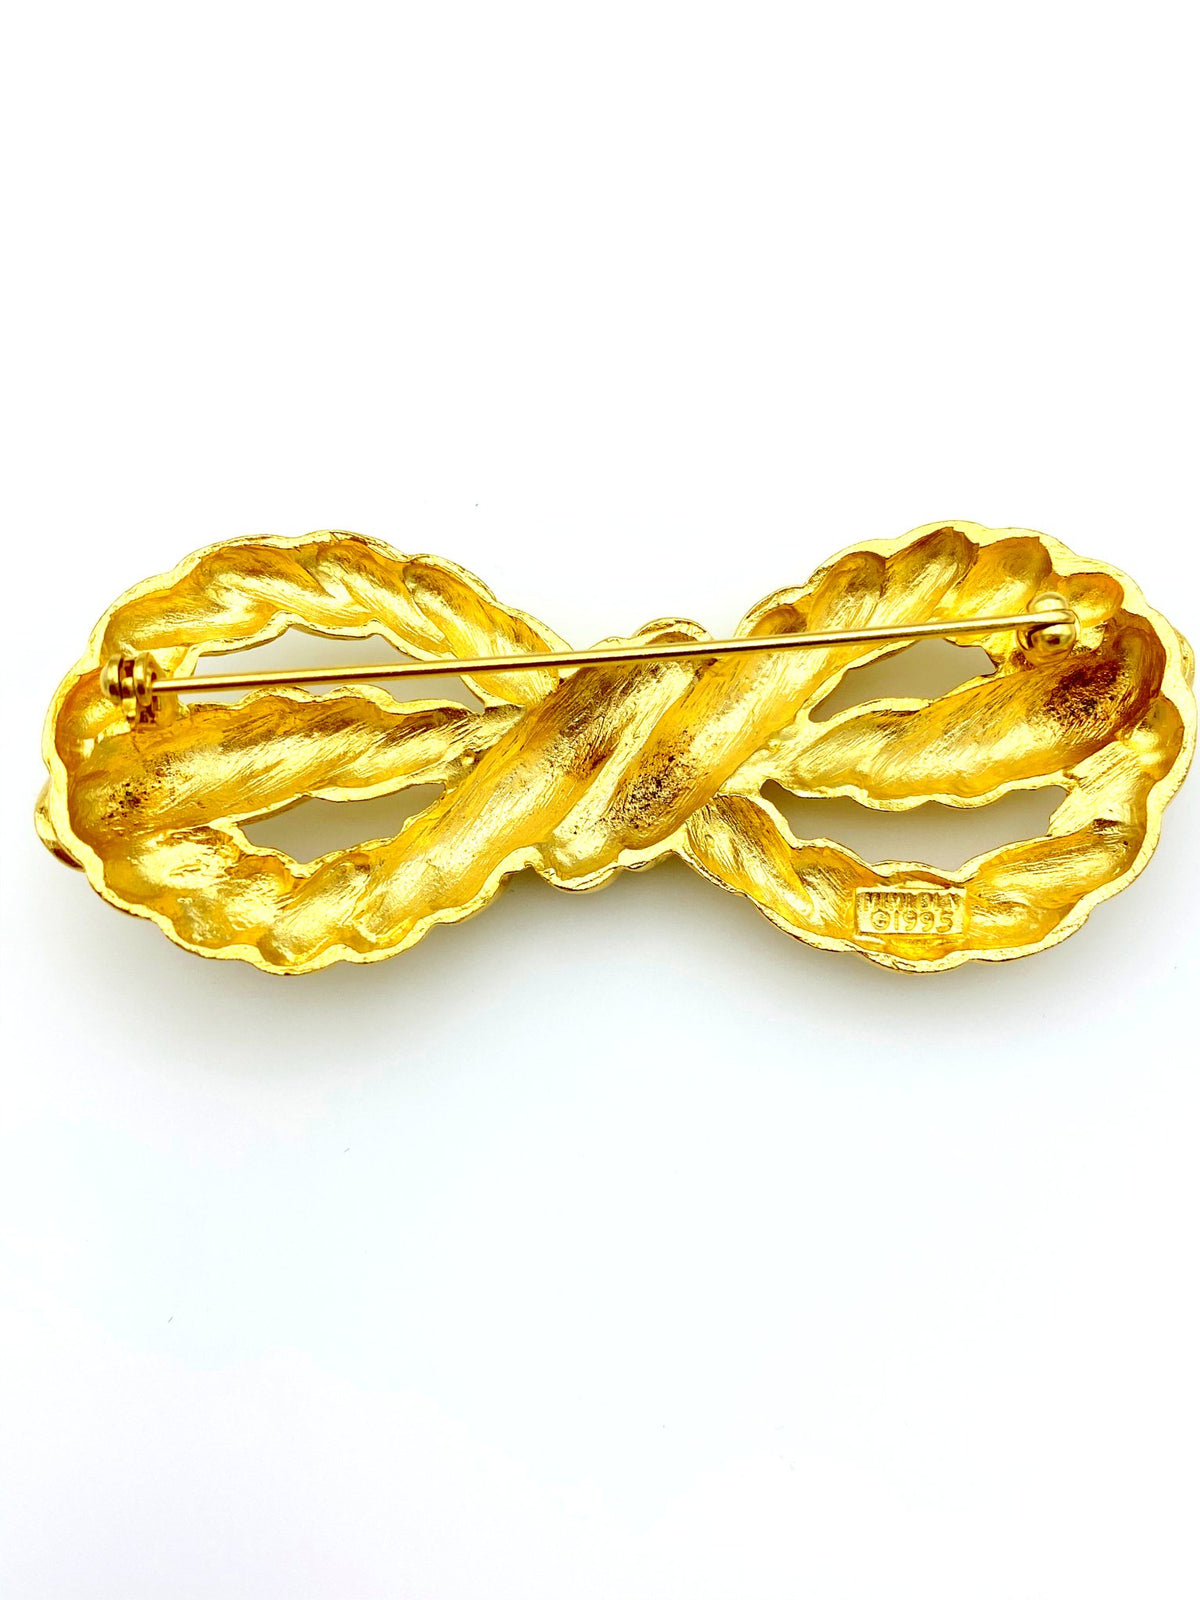 Matt Gold Rope Bow Classic Vintage Brooch by Mimi di N - 24 Wishes Vintage Jewelry